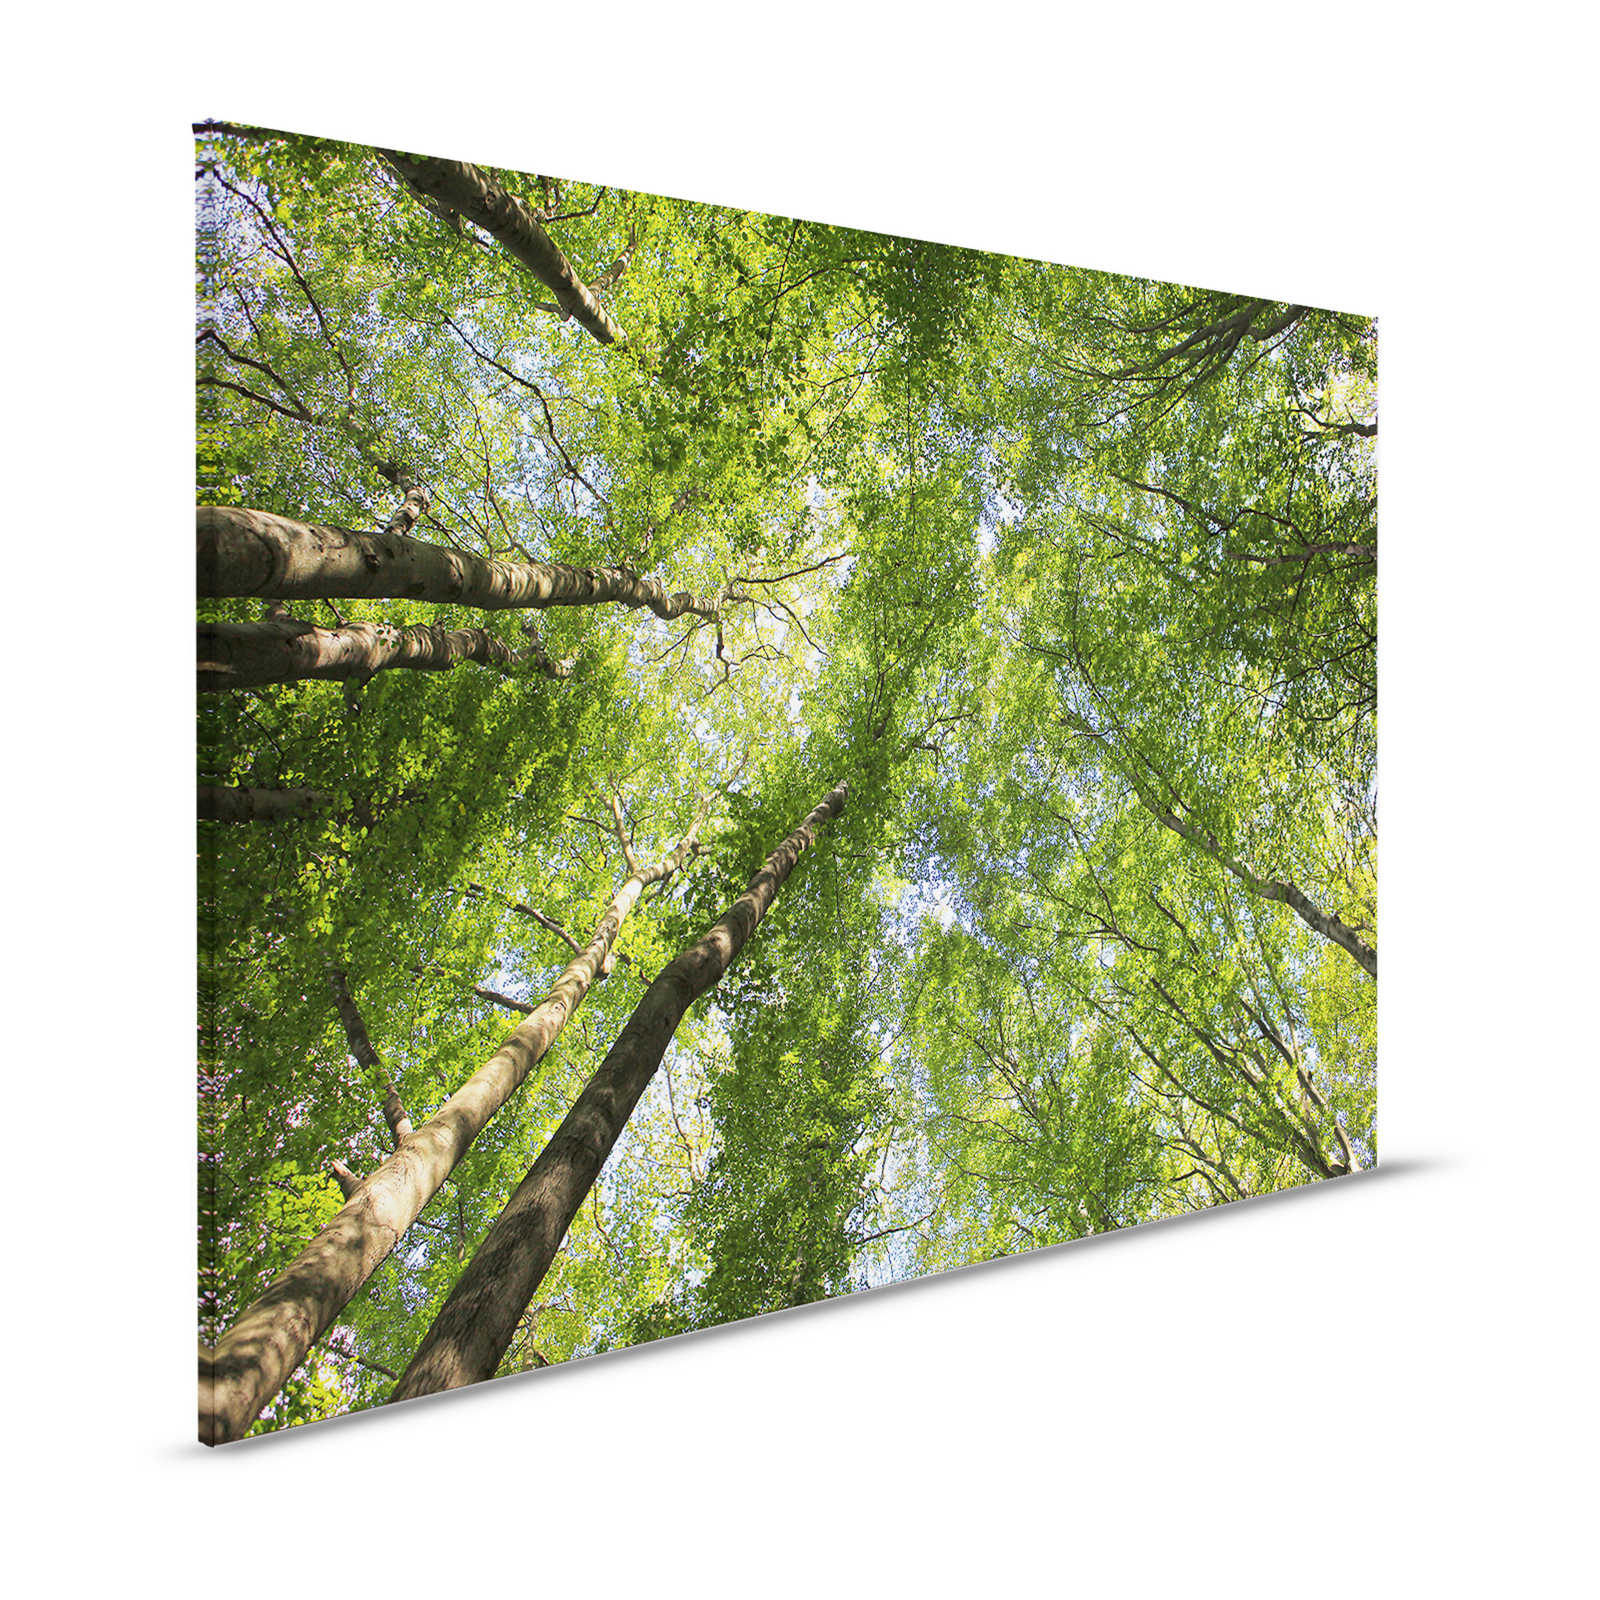 Foliage canvas picture with deciduous forest treetops - 1.20 m x 0.80 m
